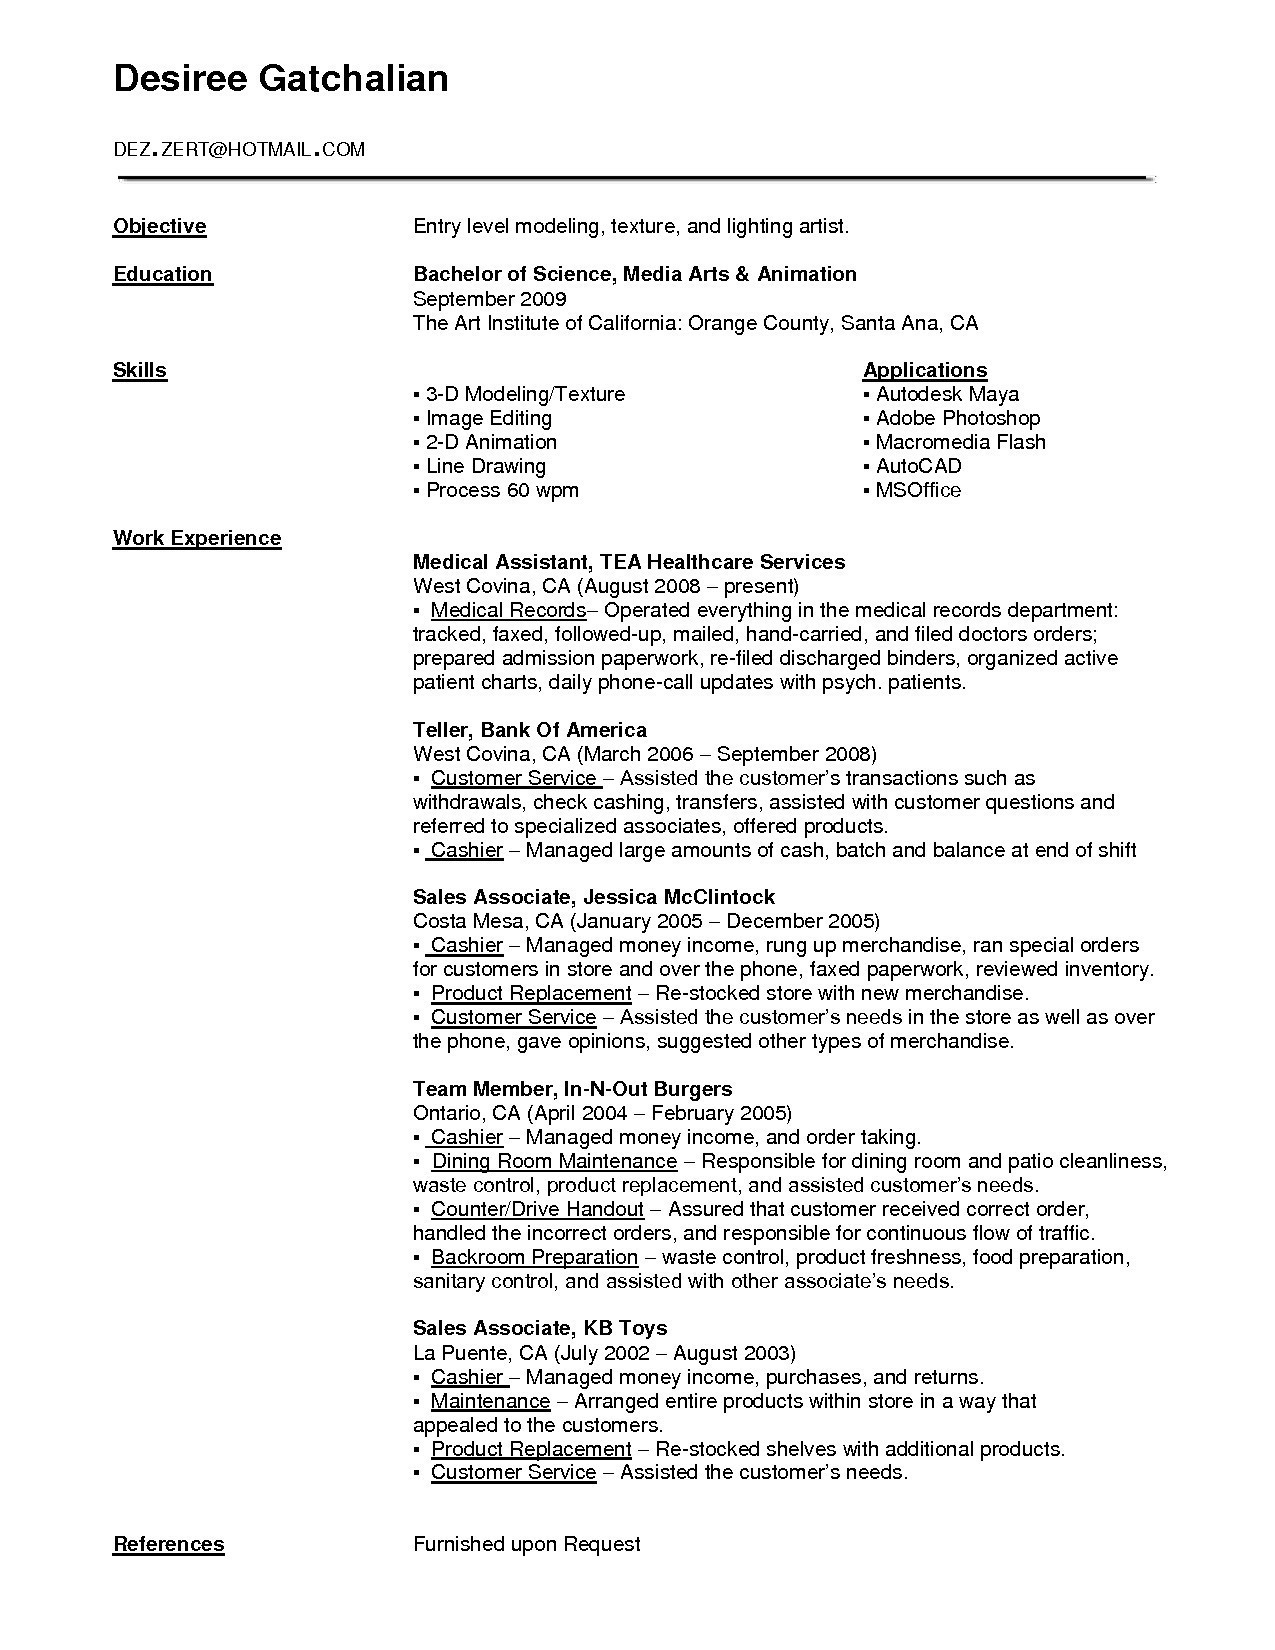 Resume Words To Use Top Resume Keywords And Phrases Best Words To Use In A New